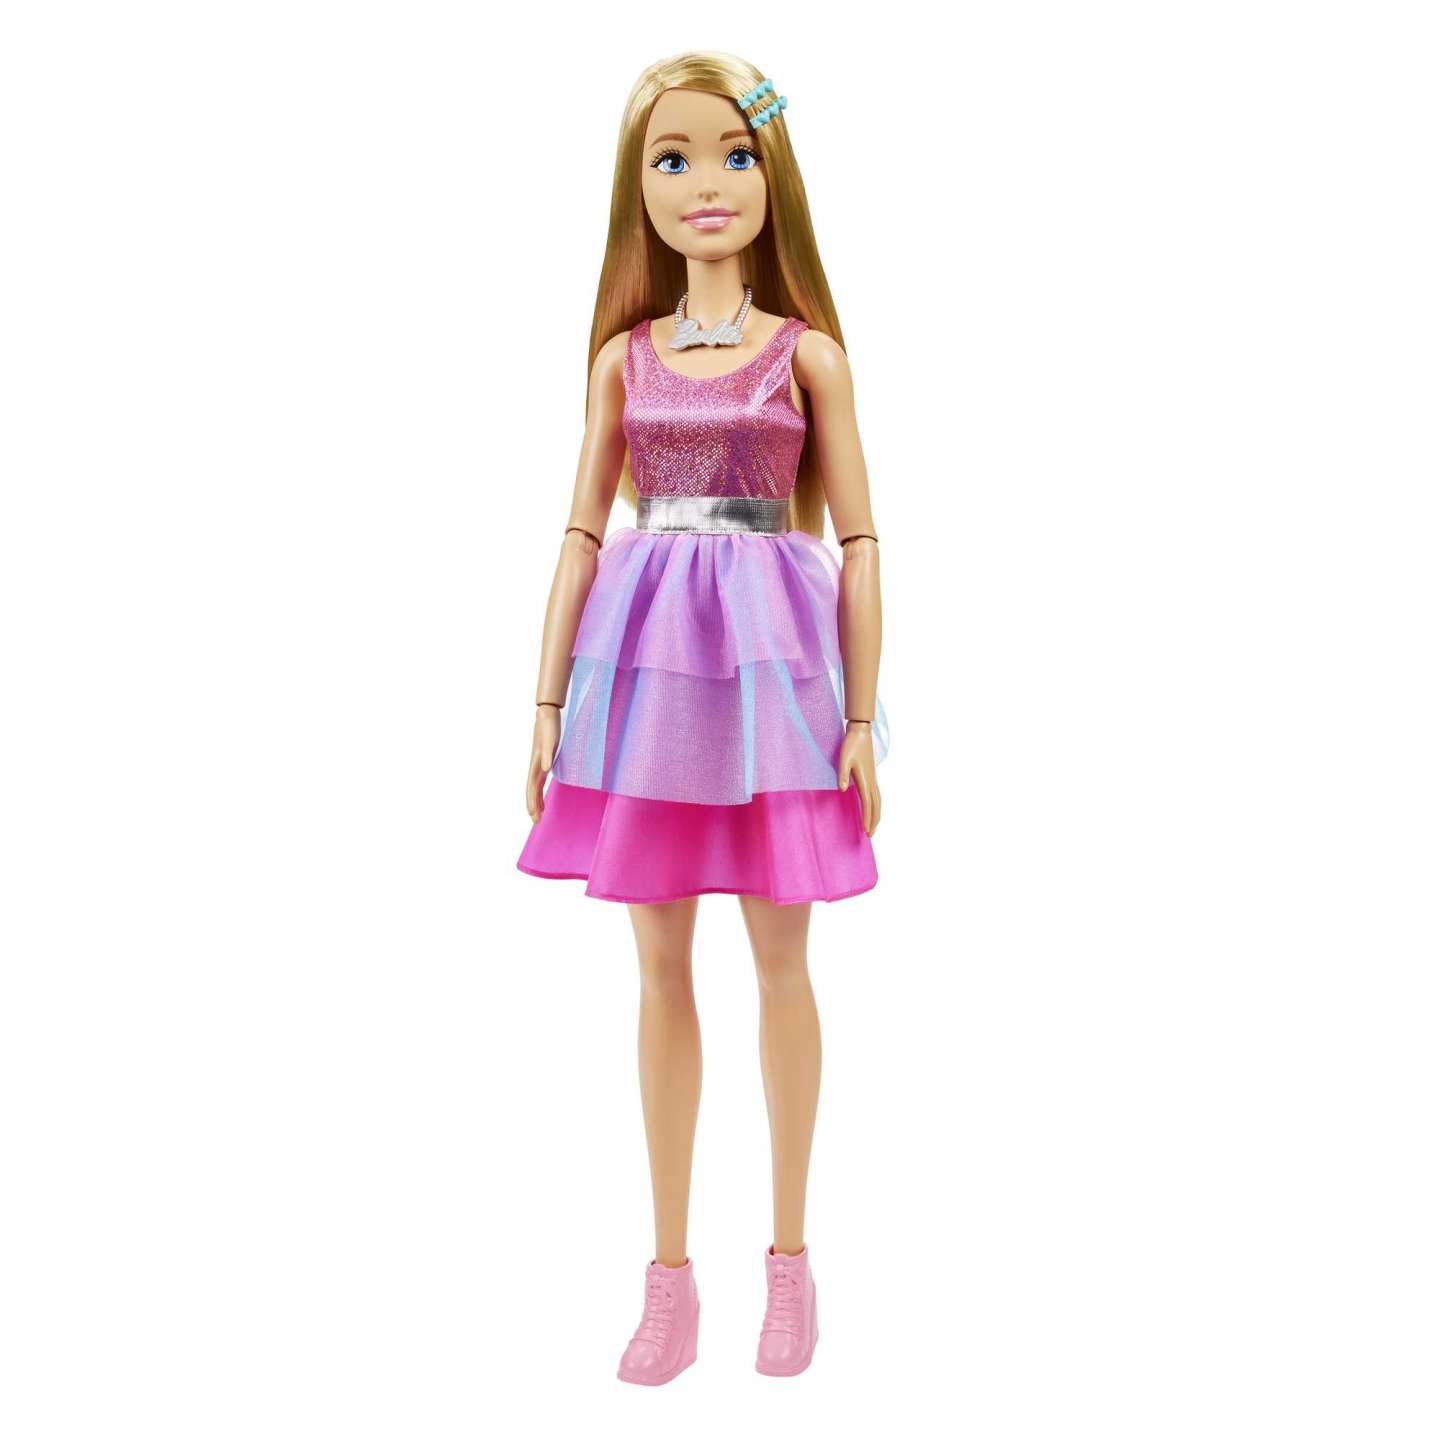 Barbie - Large Barbie Doll, 28 Inches Tall